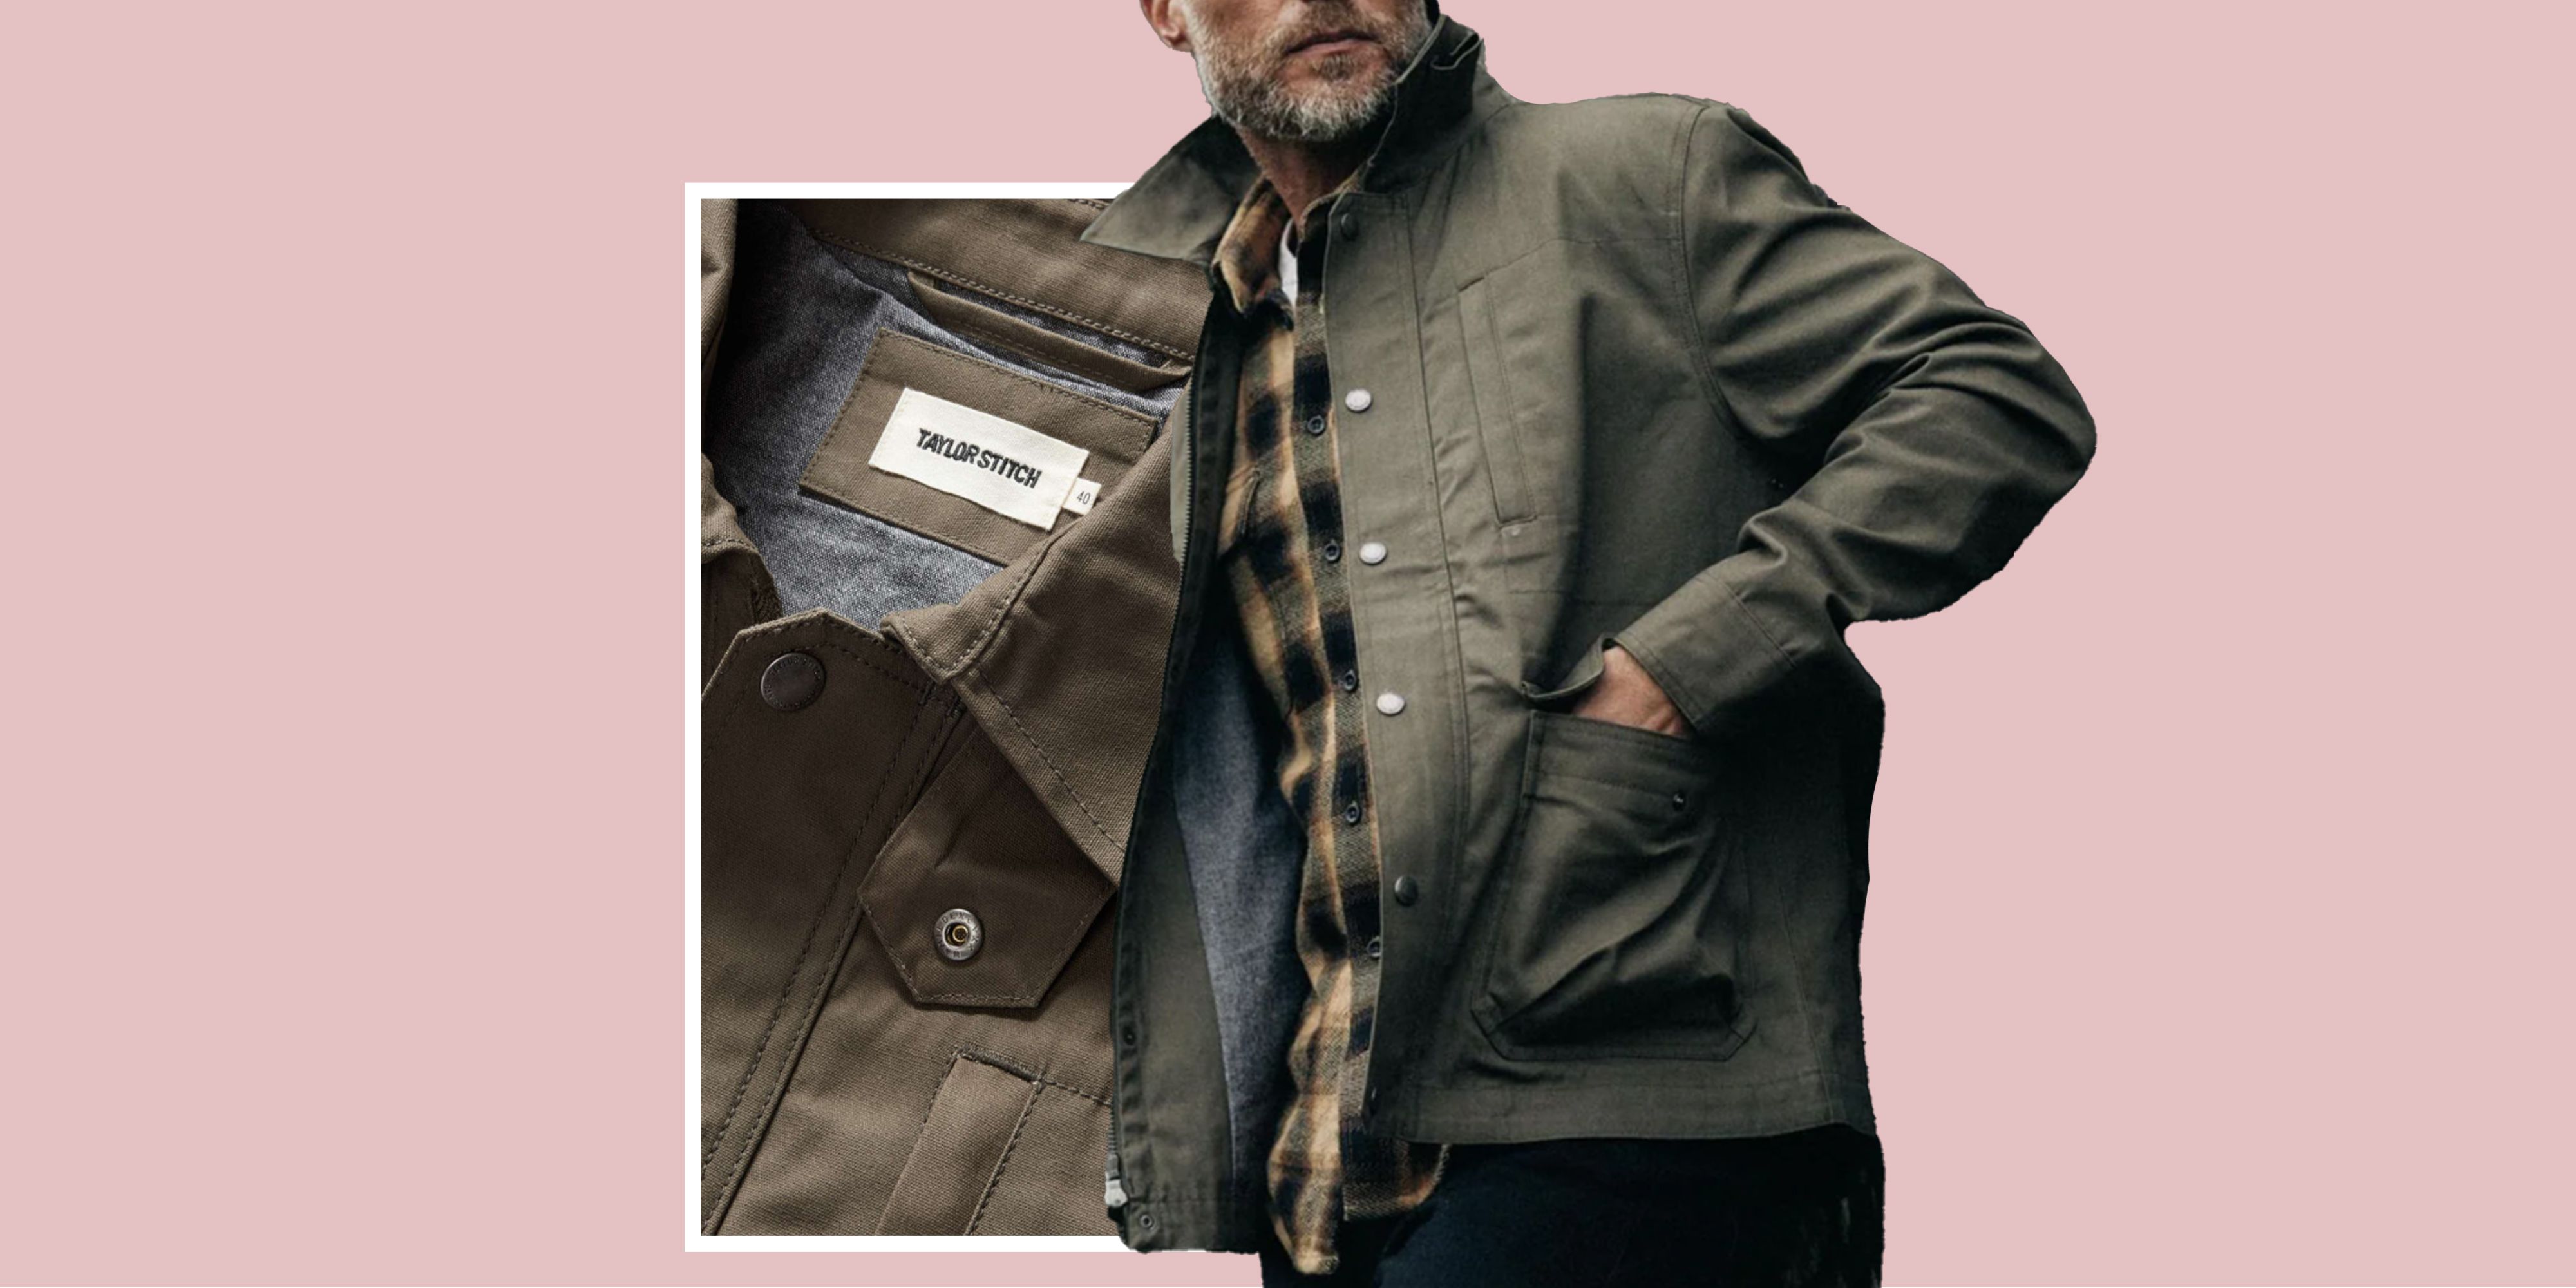 Spring Jackets Guide 2022: The Best Picks For Men This Season